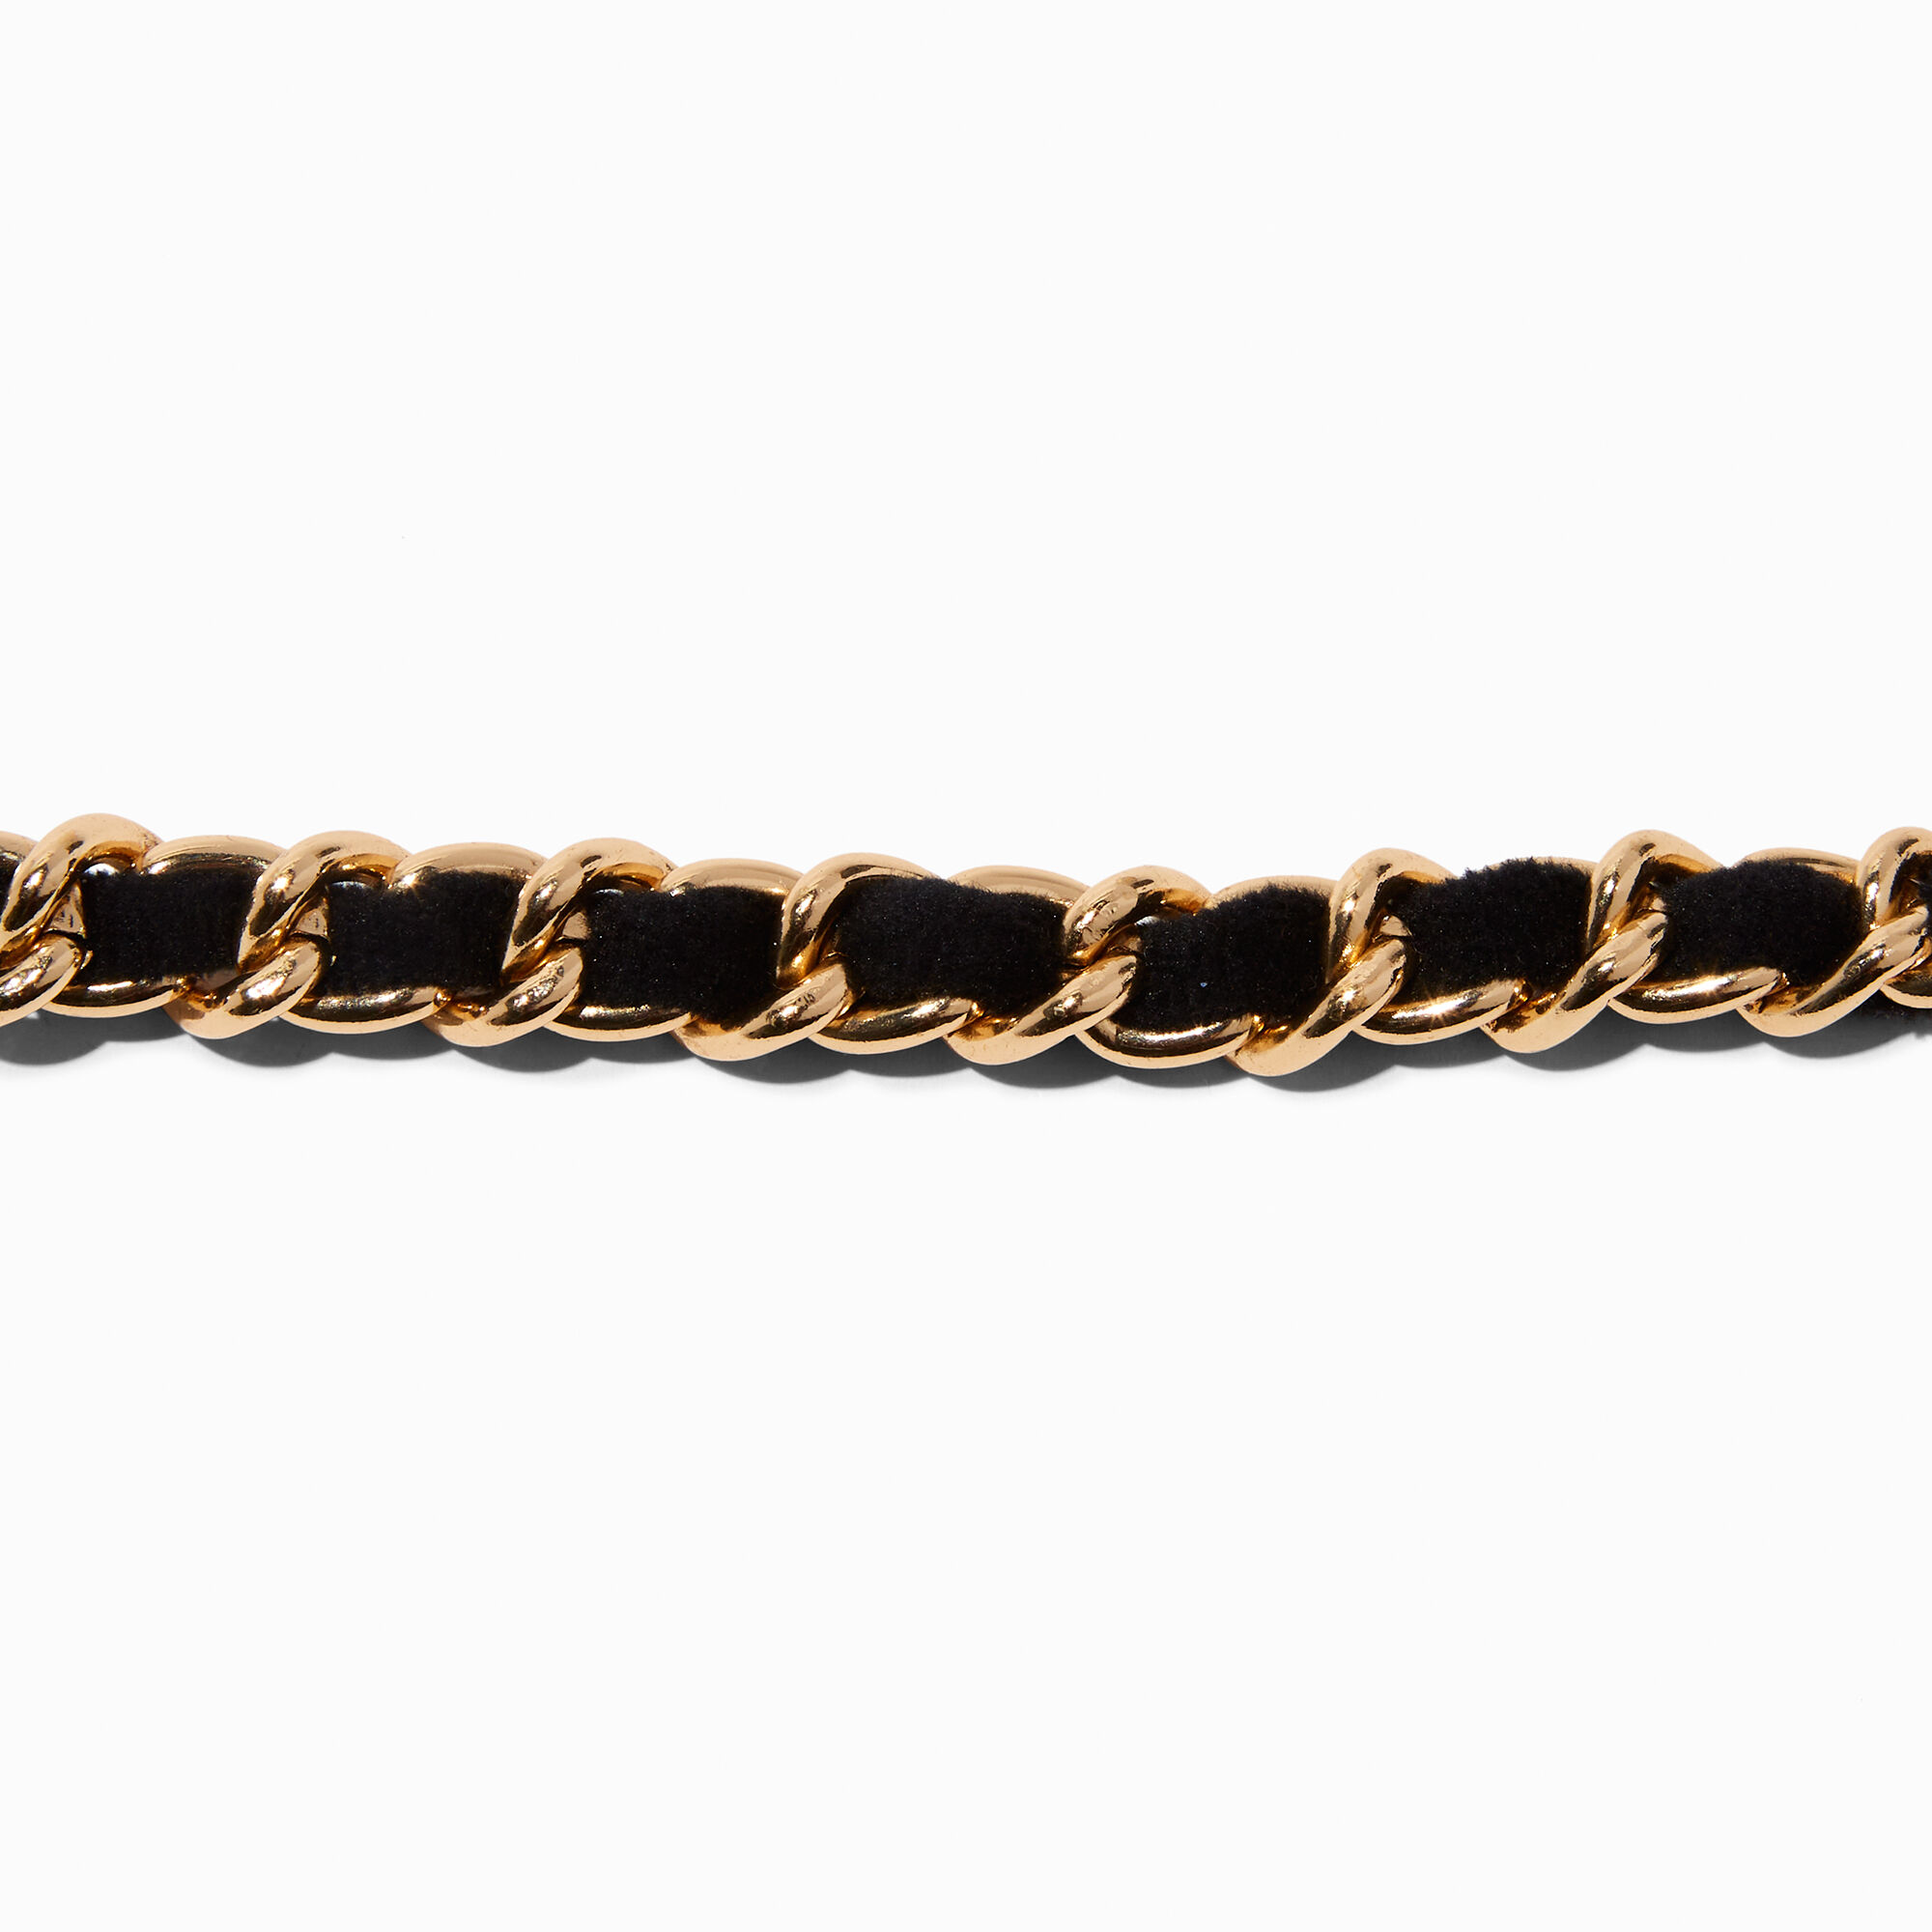 View Claires GoldTone Woven Choker Necklace Black information